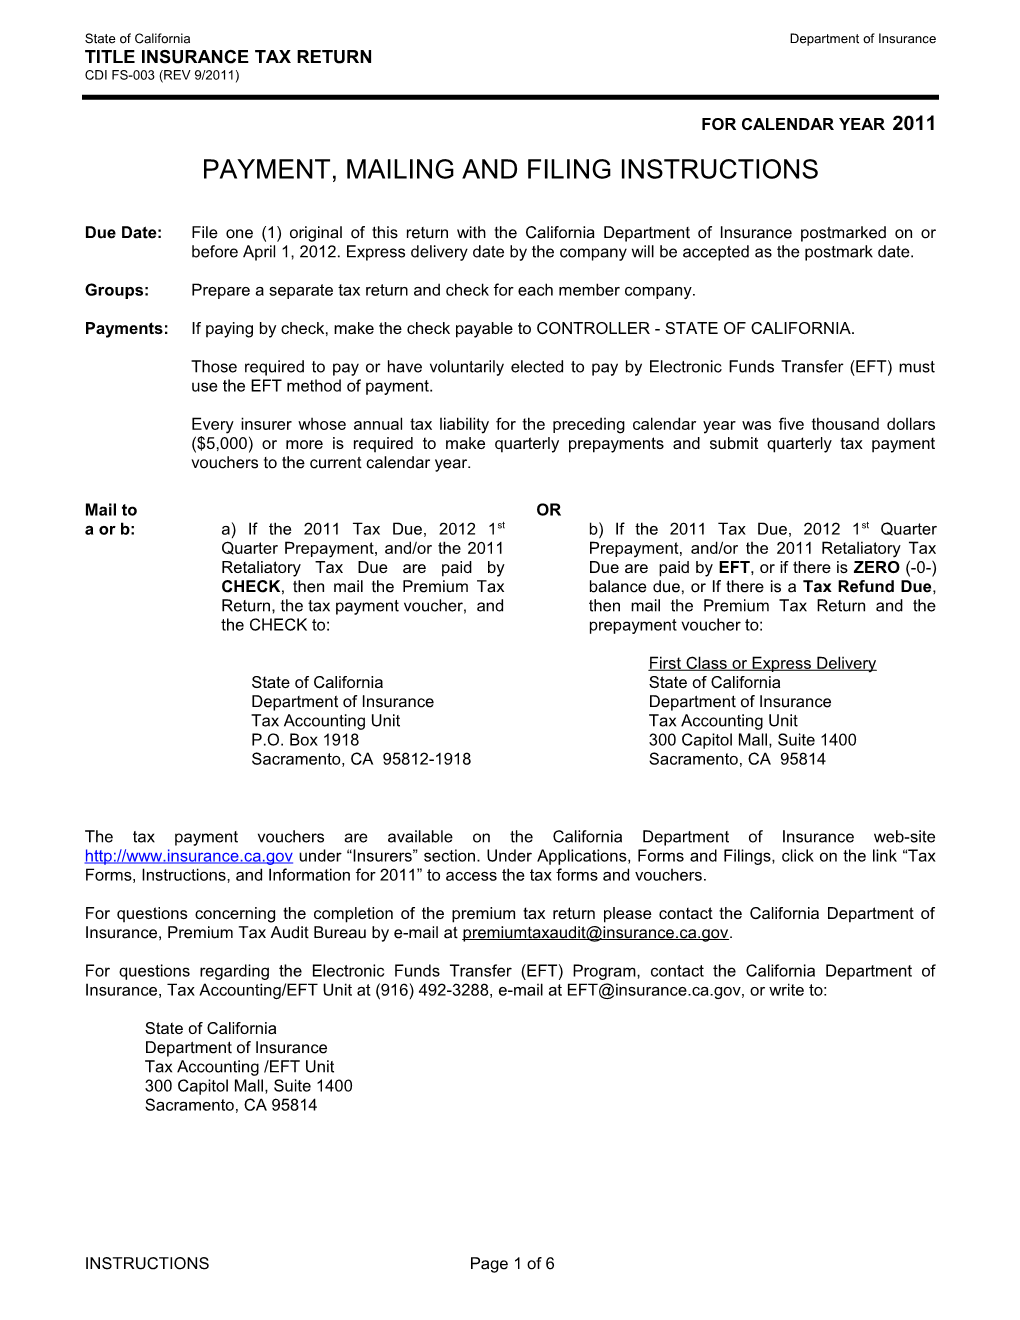 Payment, Mailing and Filing Instructions s2